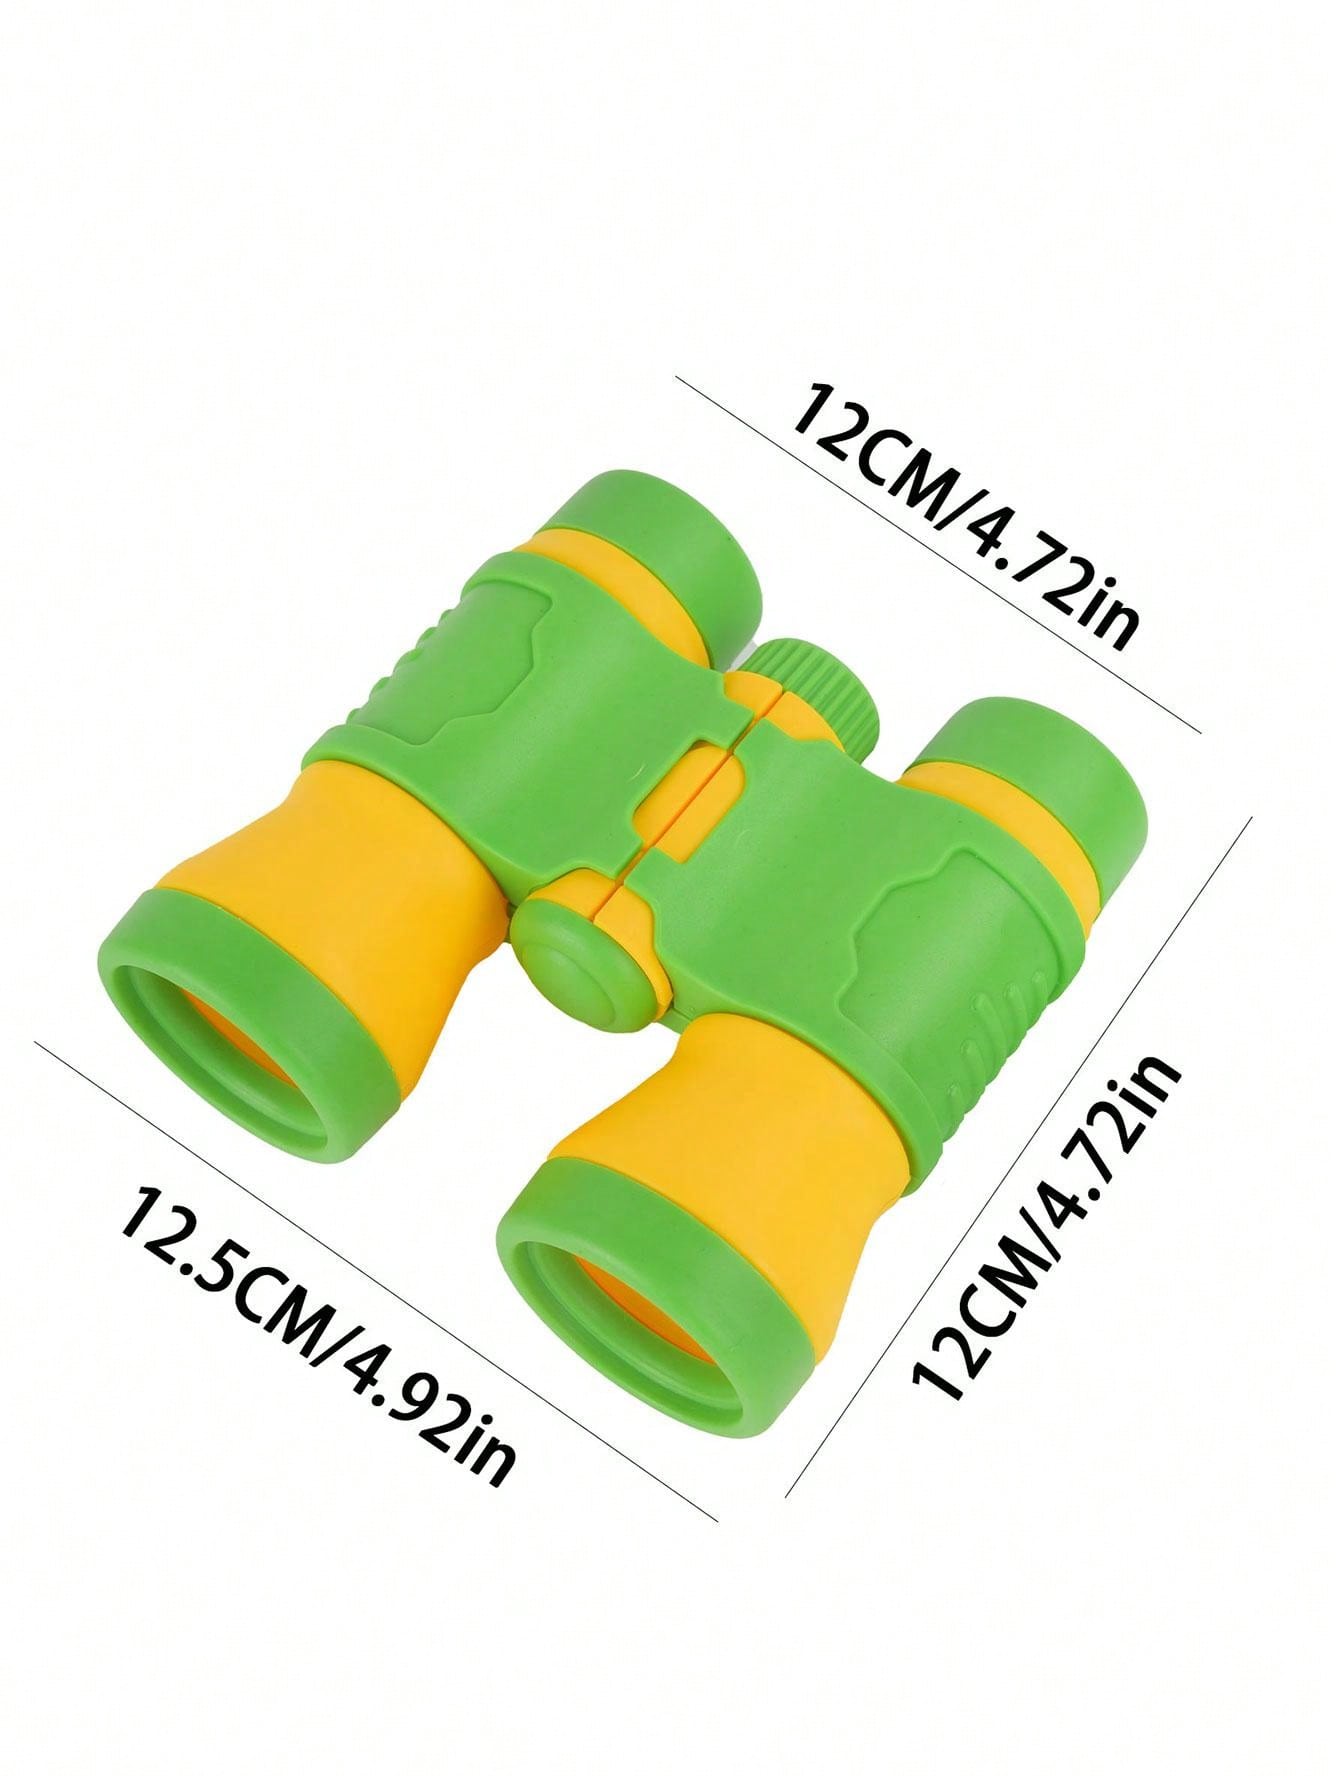 1pc Green Telescope For Kids, Boys And Girls Toy, Hd Outdoor Mini Portable Binoculars, 3-12 Years Old